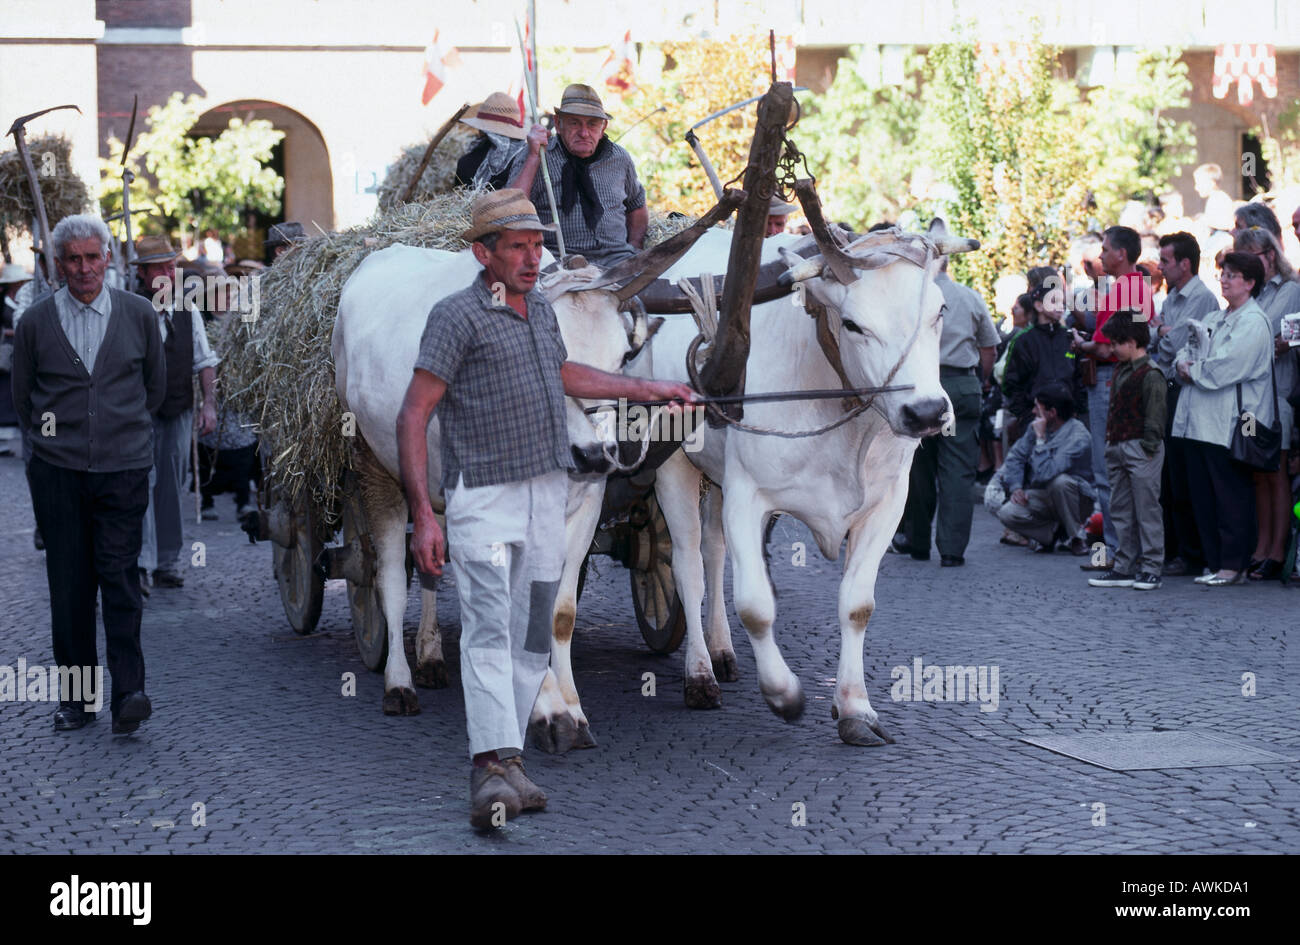 People in costumes with ox cart during festival, Festival delle Sagre, Asti, Piedmont, Italy Stock Photo